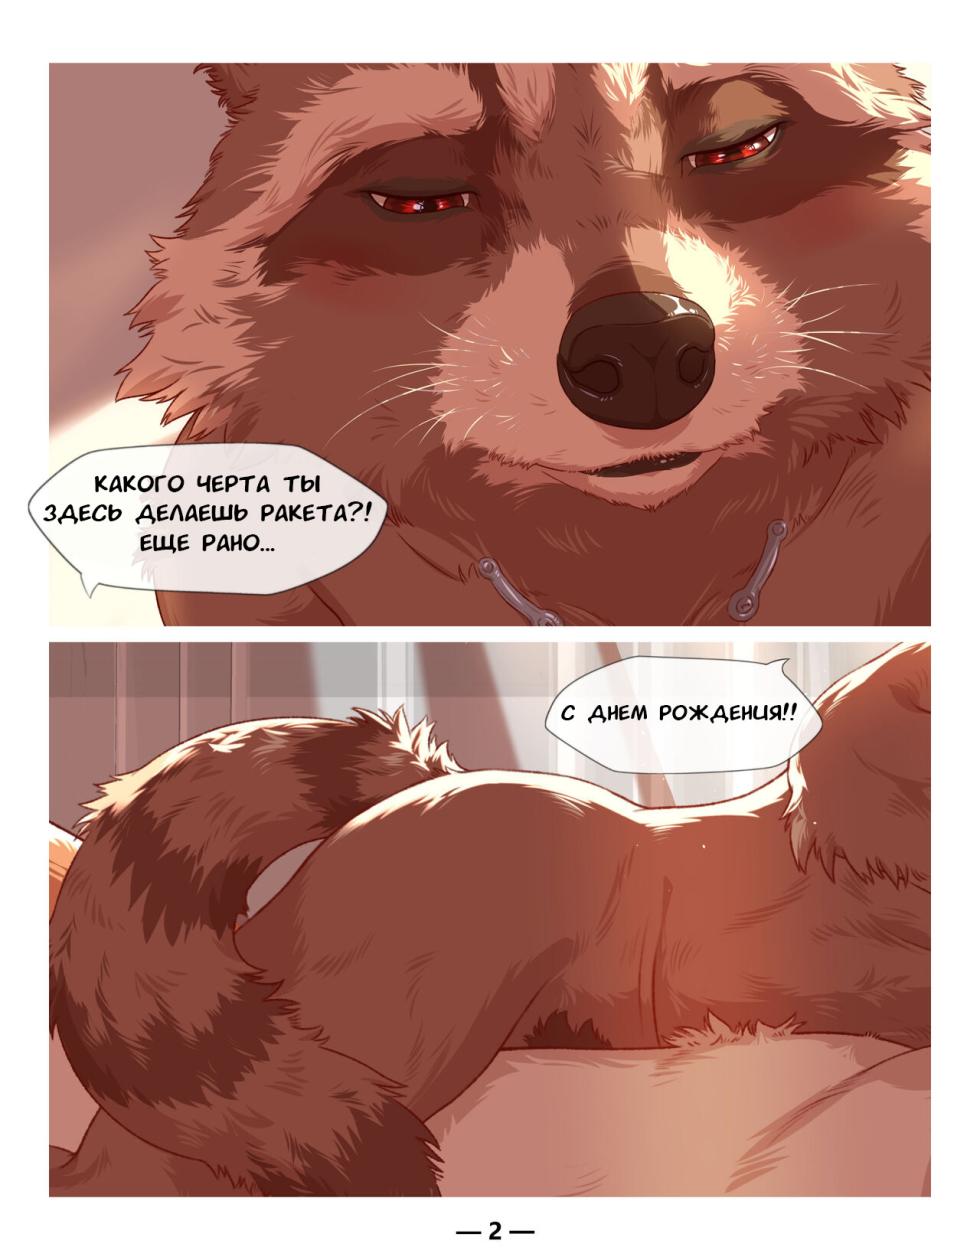 [Sadness-Hao] Rocket's Birthday Present (Guardians of the Galaxy) (Ongoing) - Page 2